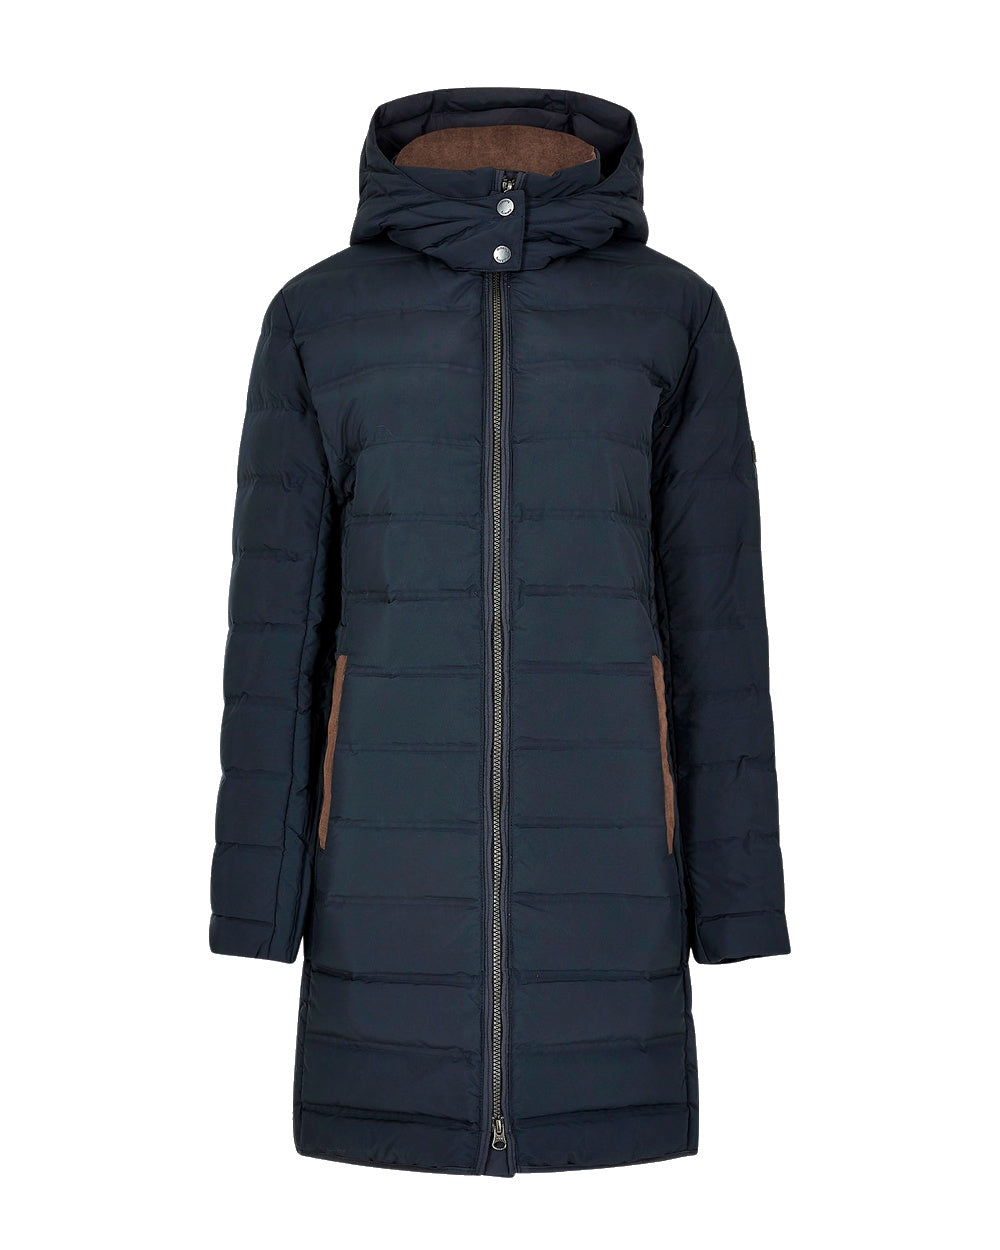 Dubarry Ballybrophy Quilted Jacket in Navy 